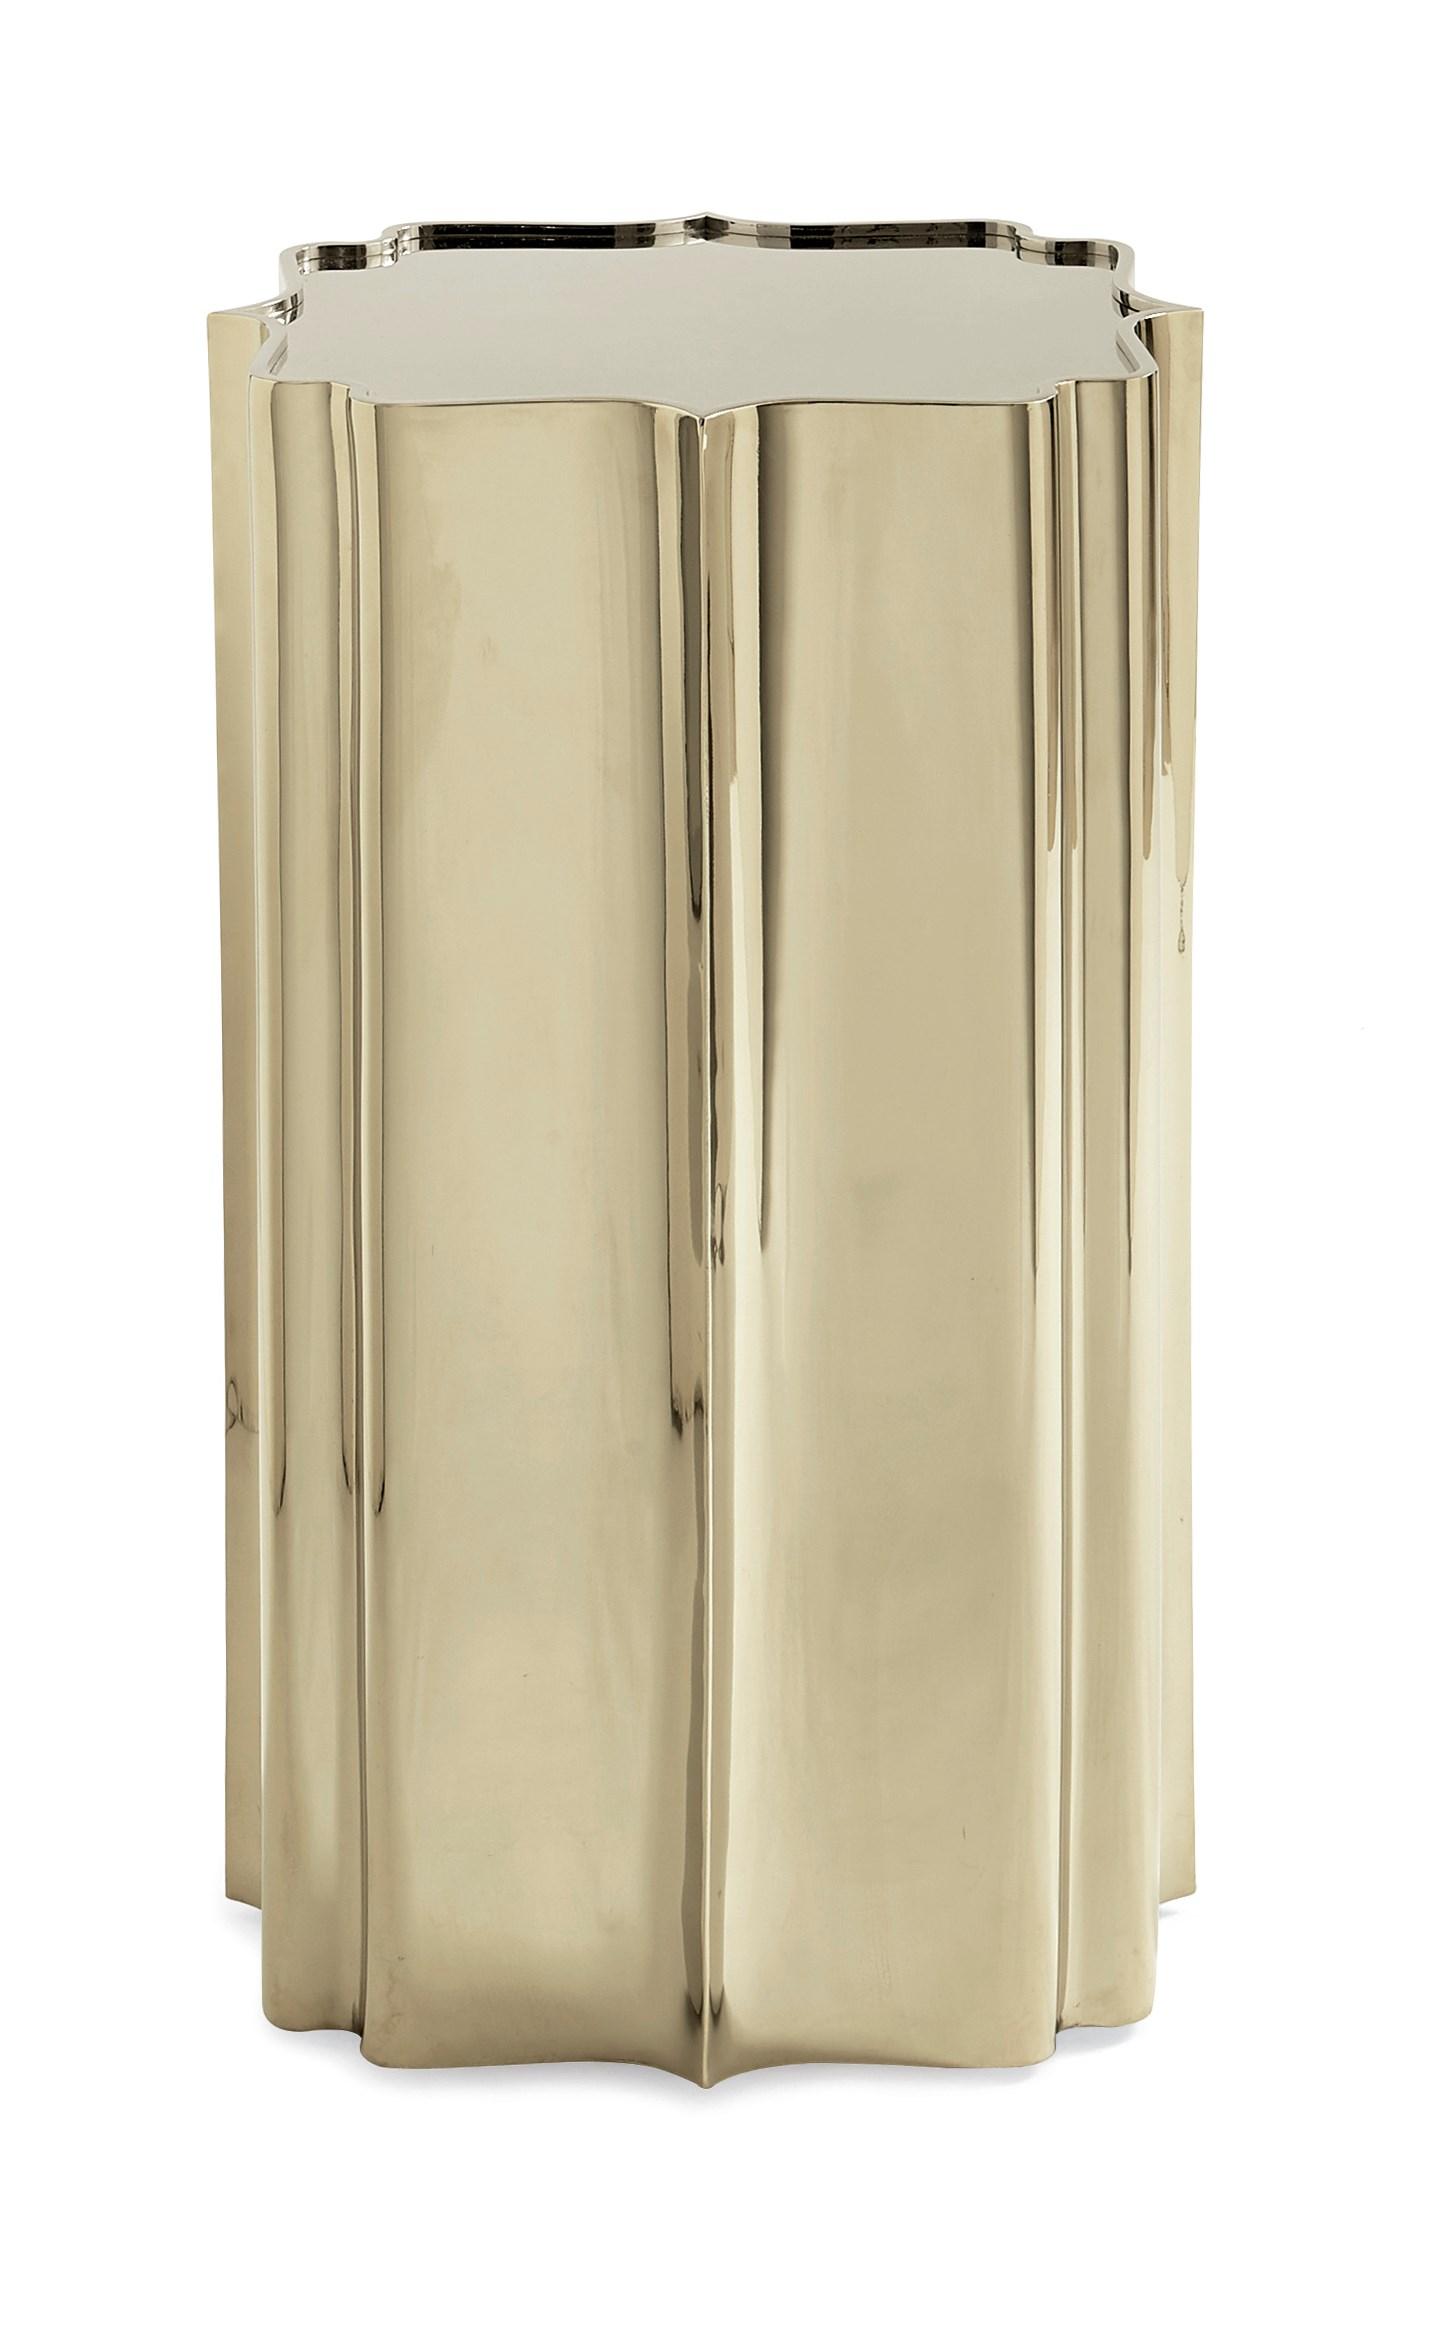 Contemporary End Table GOOD AS GOLD CLA-016-429 in Gold 